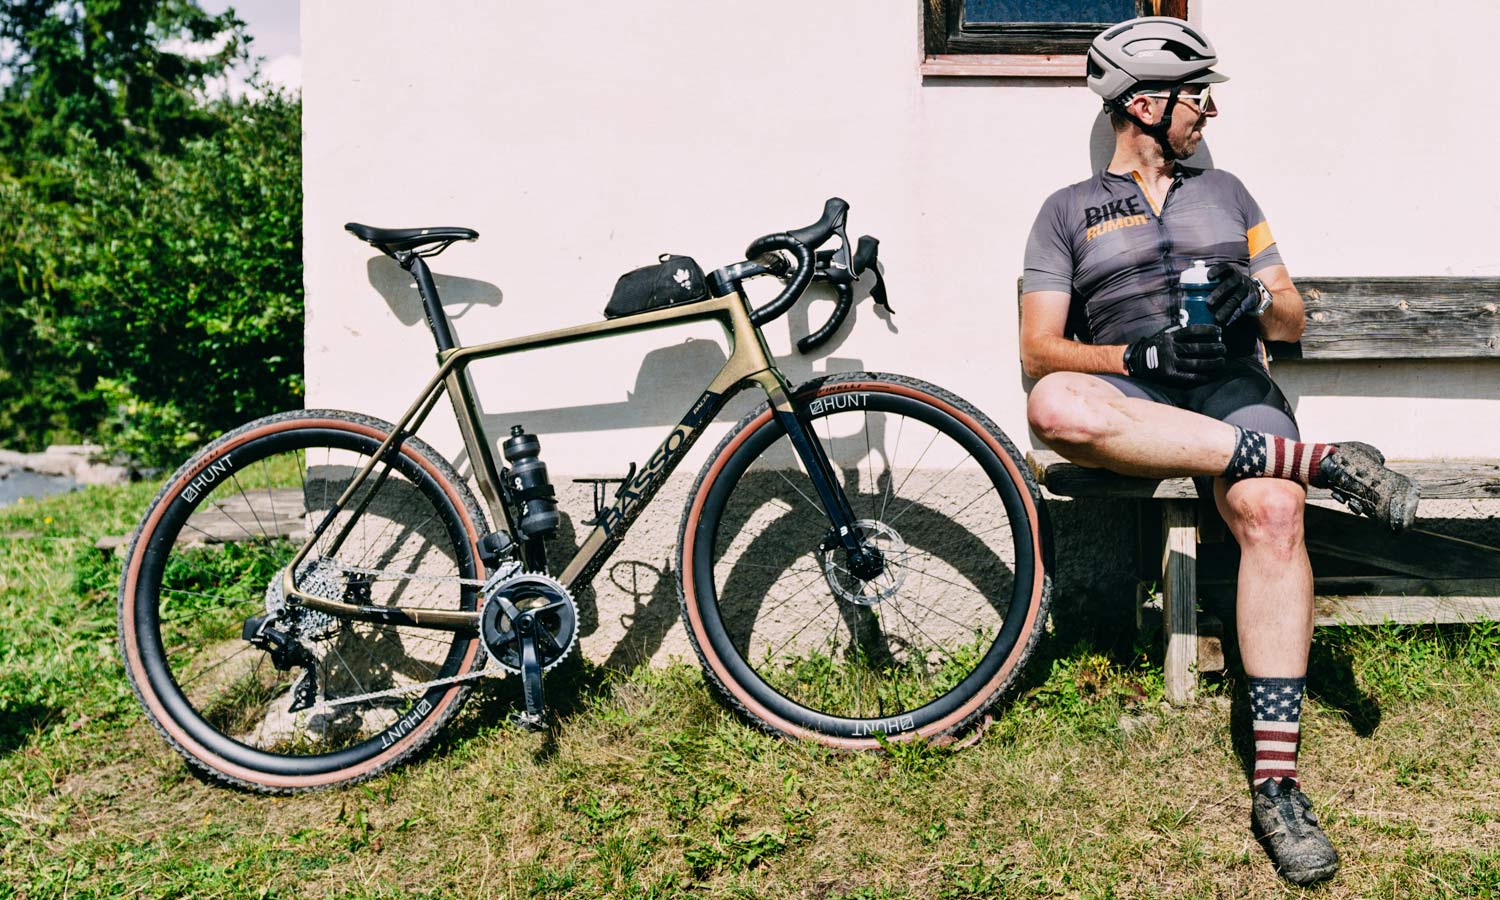 2022 Basso Palta II carbon gravel bike review made-in-Italy, photo by Francesco Bonato, pit-stop